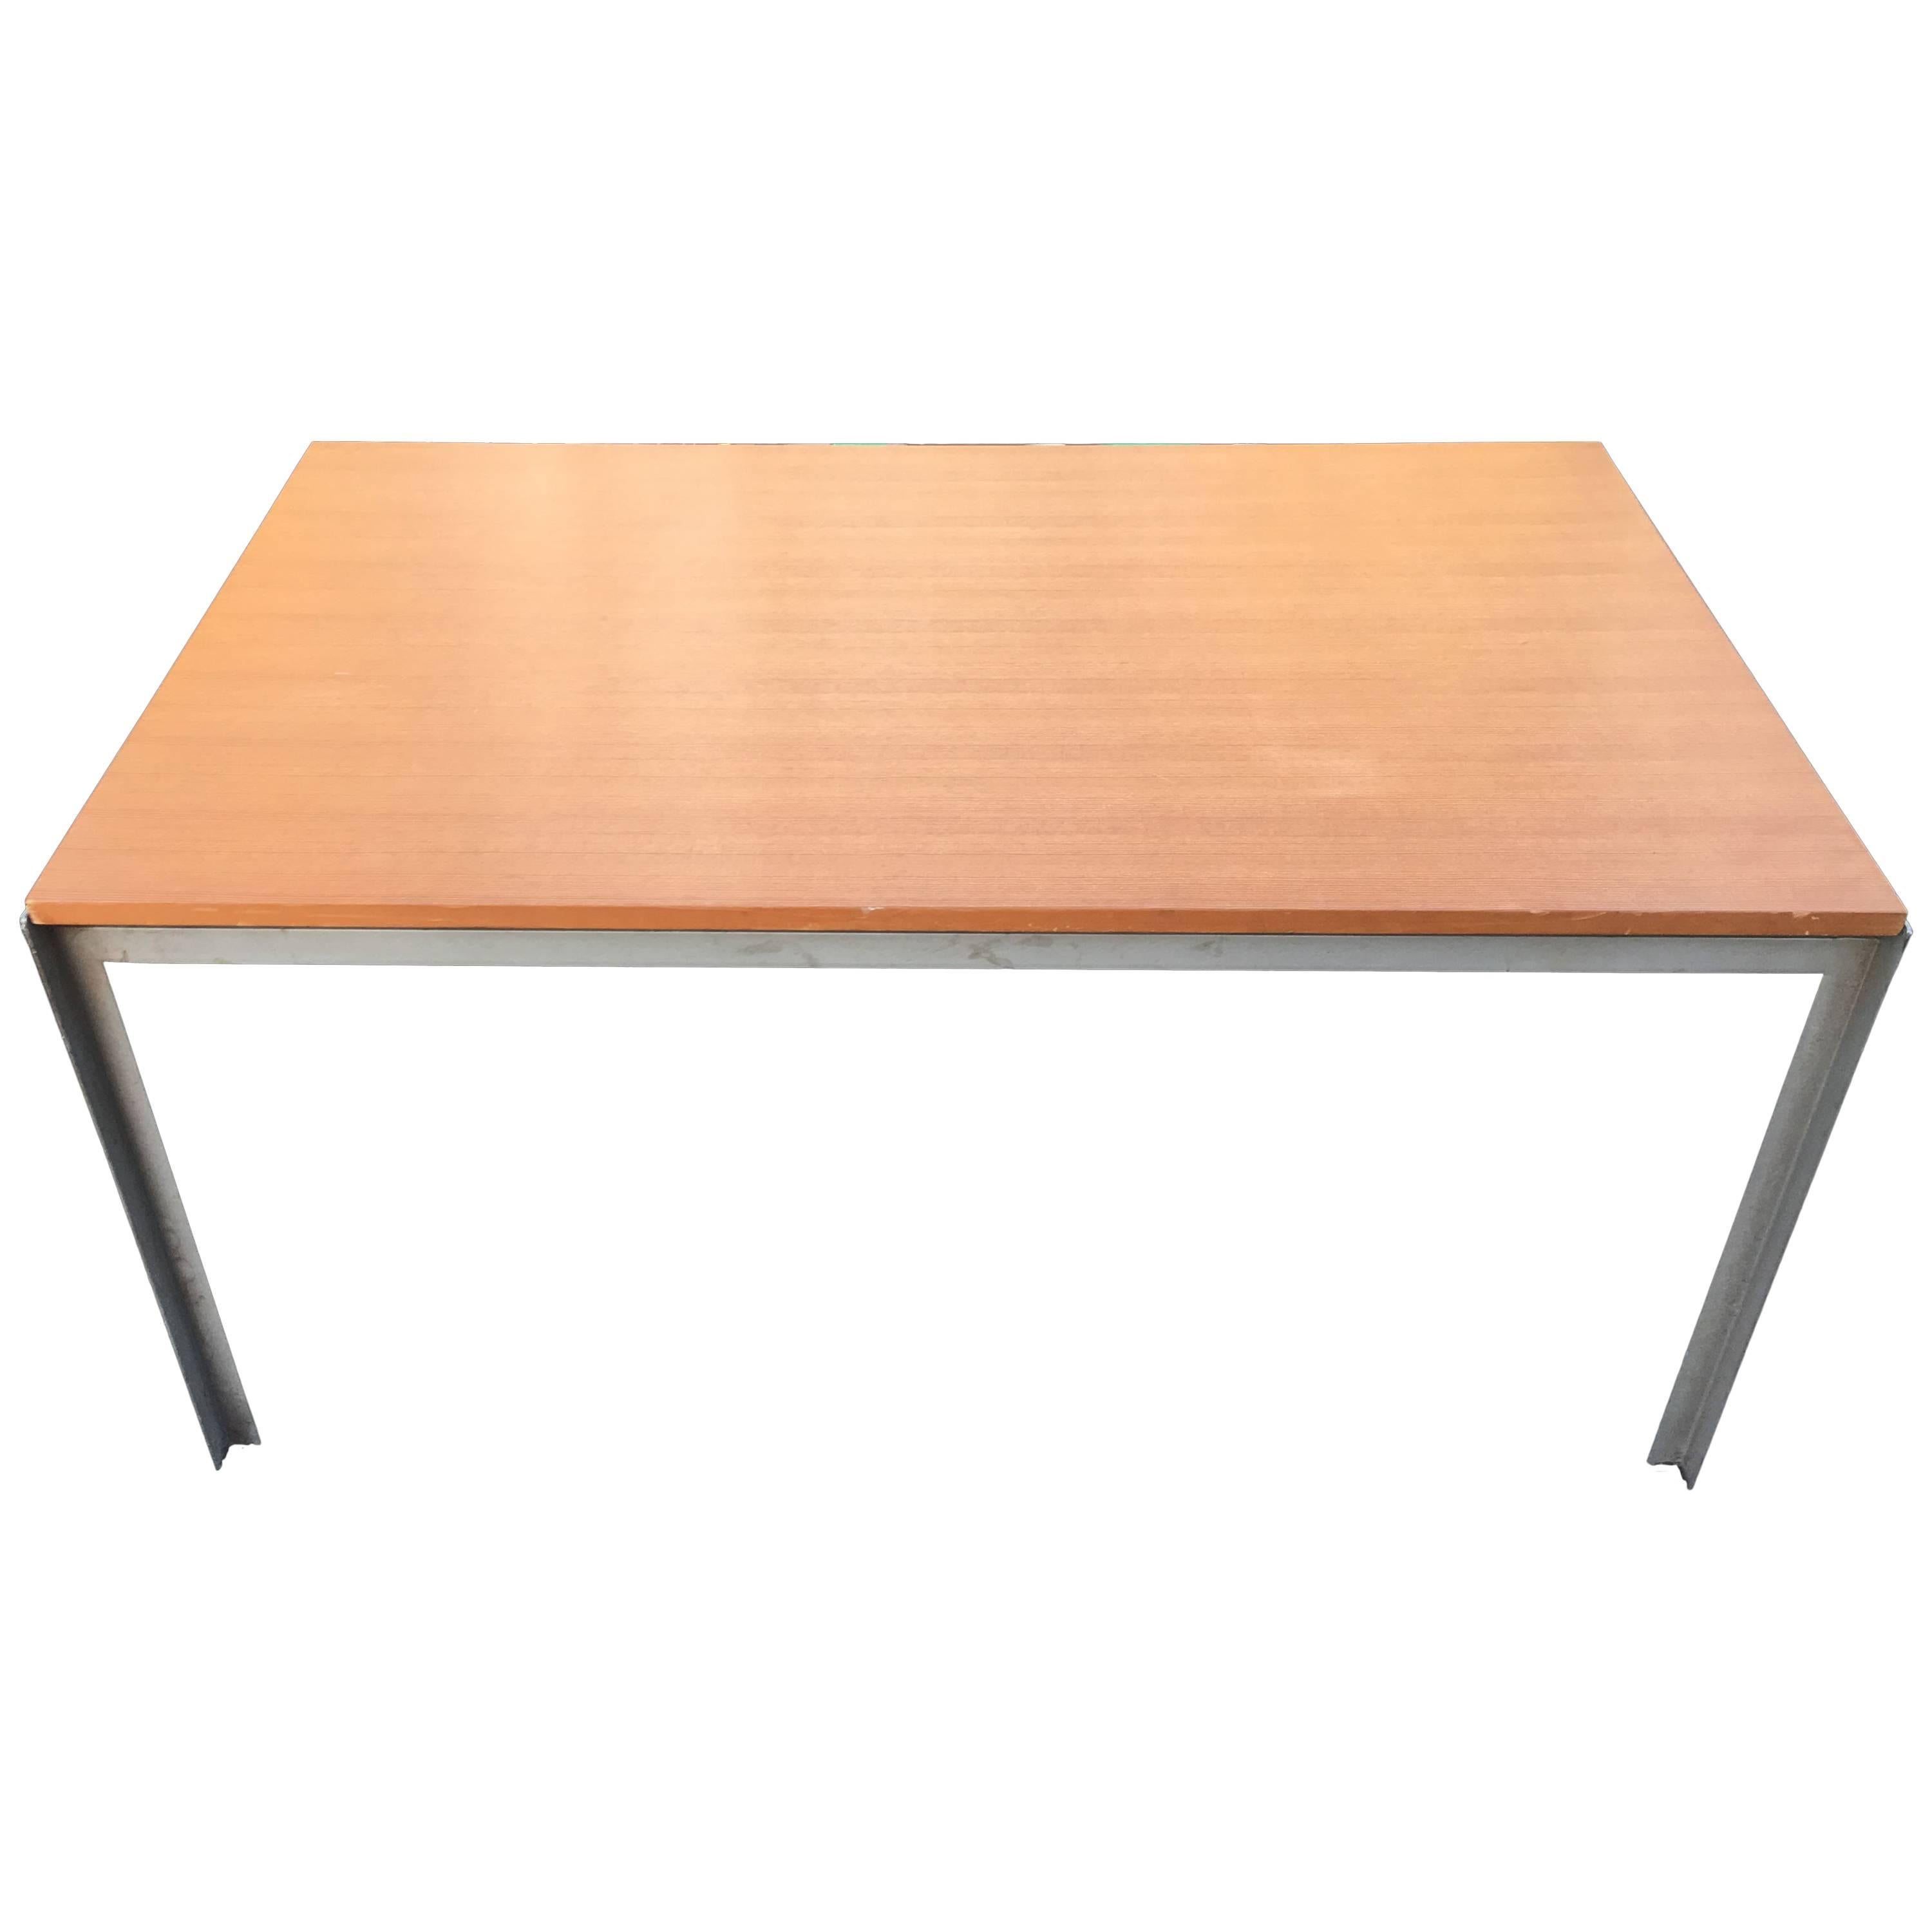 Very Rare and Original Writing Table PK53 by Poul Kjaerholm for Rud Rasmussen For Sale